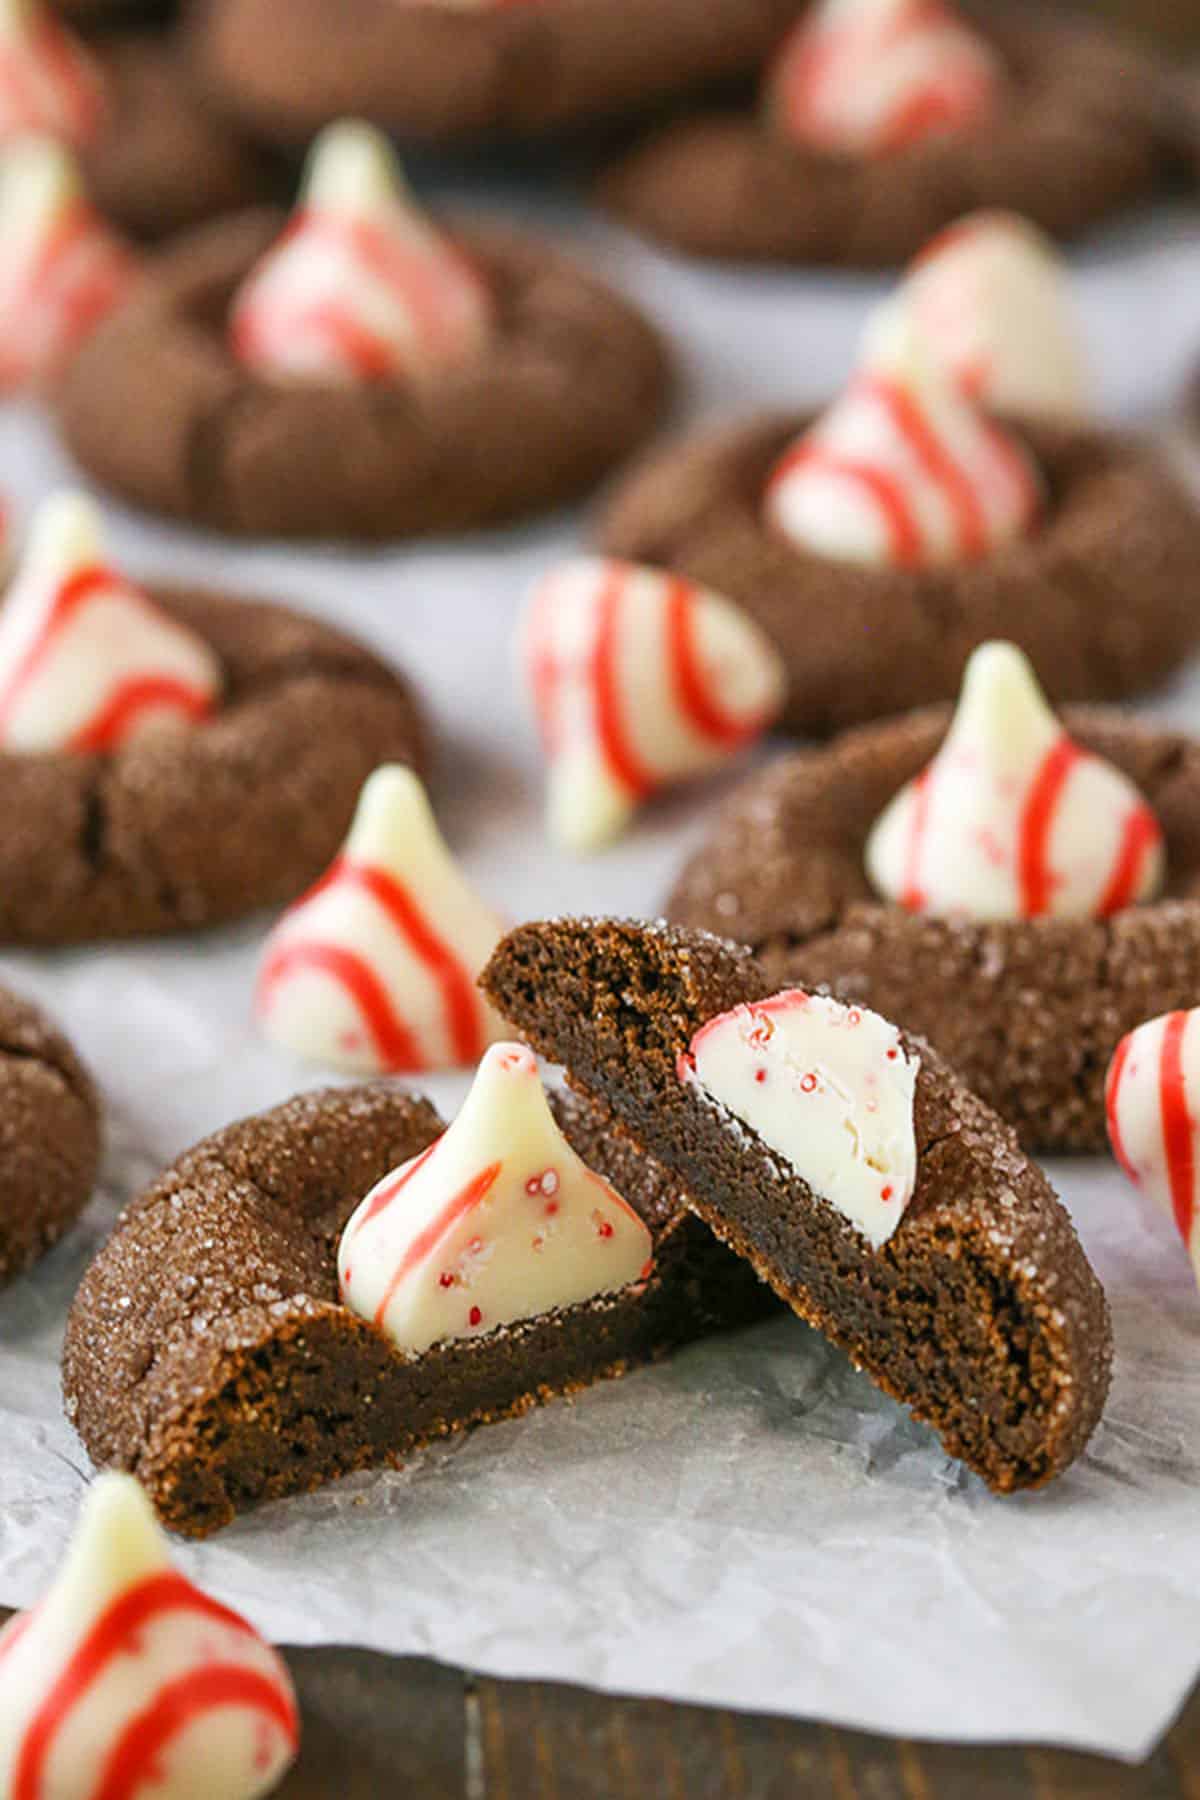 A Peppermint Chocolate Thumbprint Cookie broken in half with whole Peppermint Chocolate Thumbprint Cookies in the background